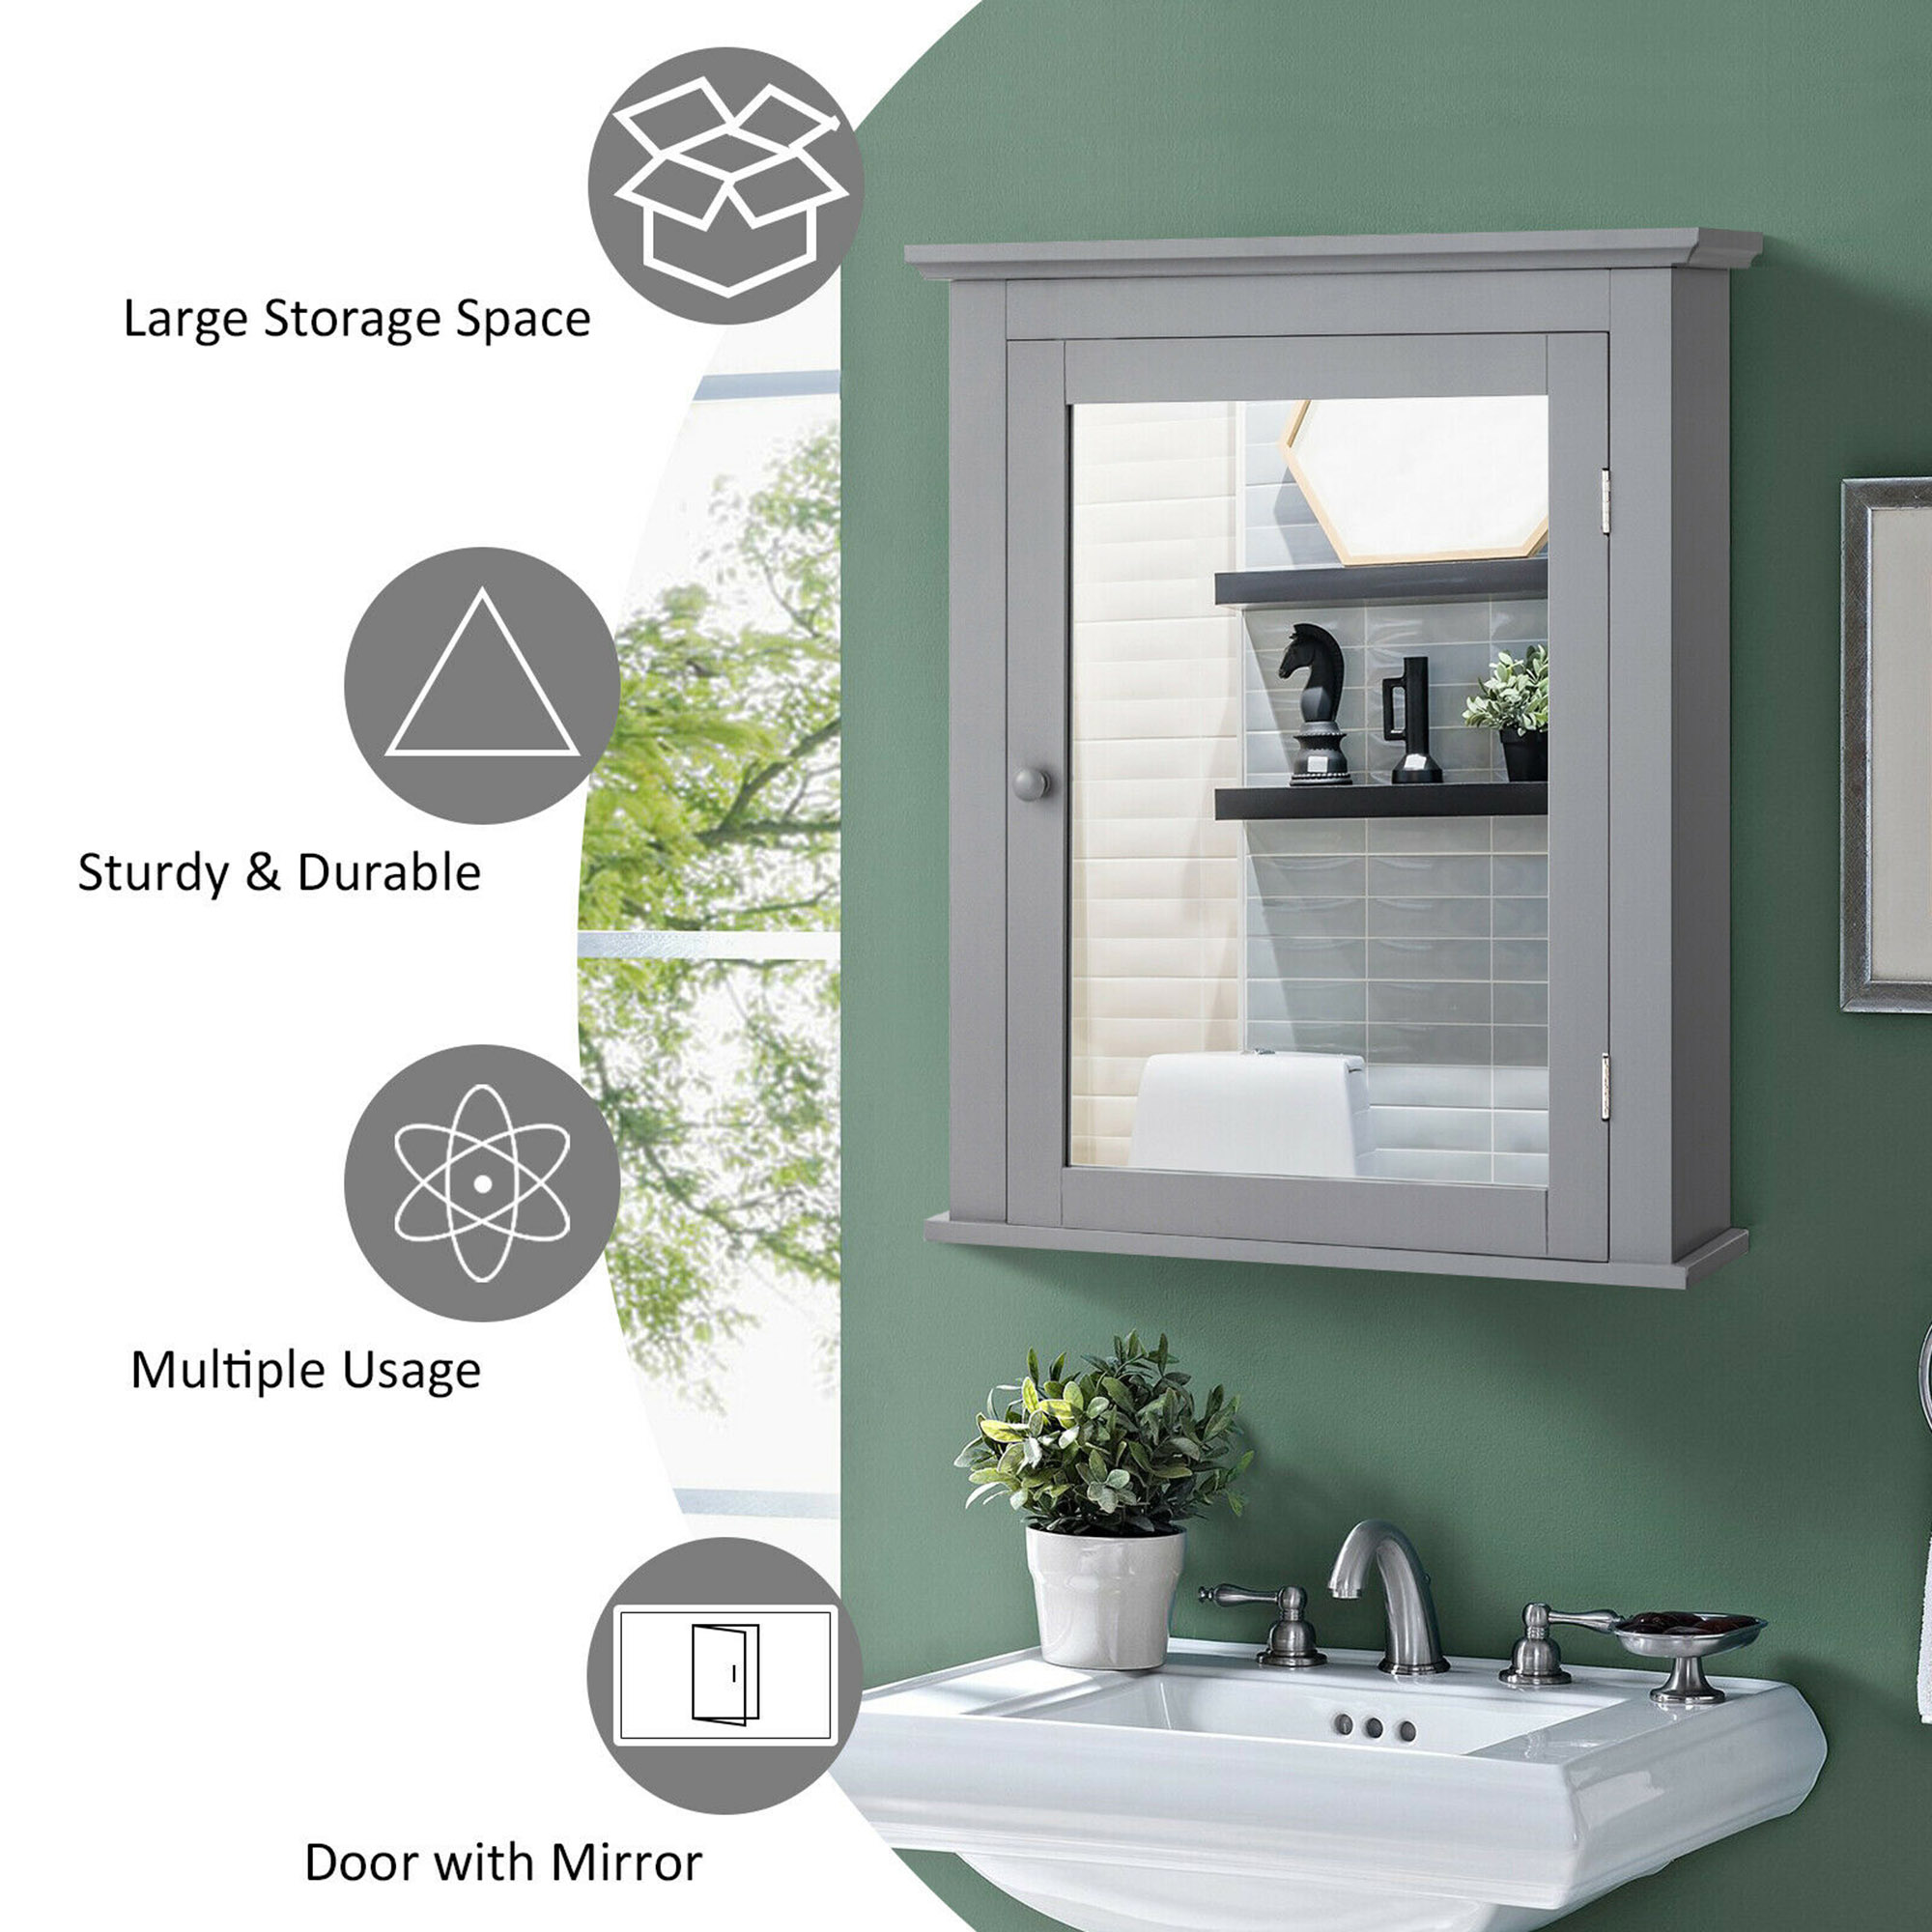 Mirror Wall Mounted Cabinet For the Bathroom and Vanity with Adjustable  Shelves gray, 1 unit - Gerbes Super Markets